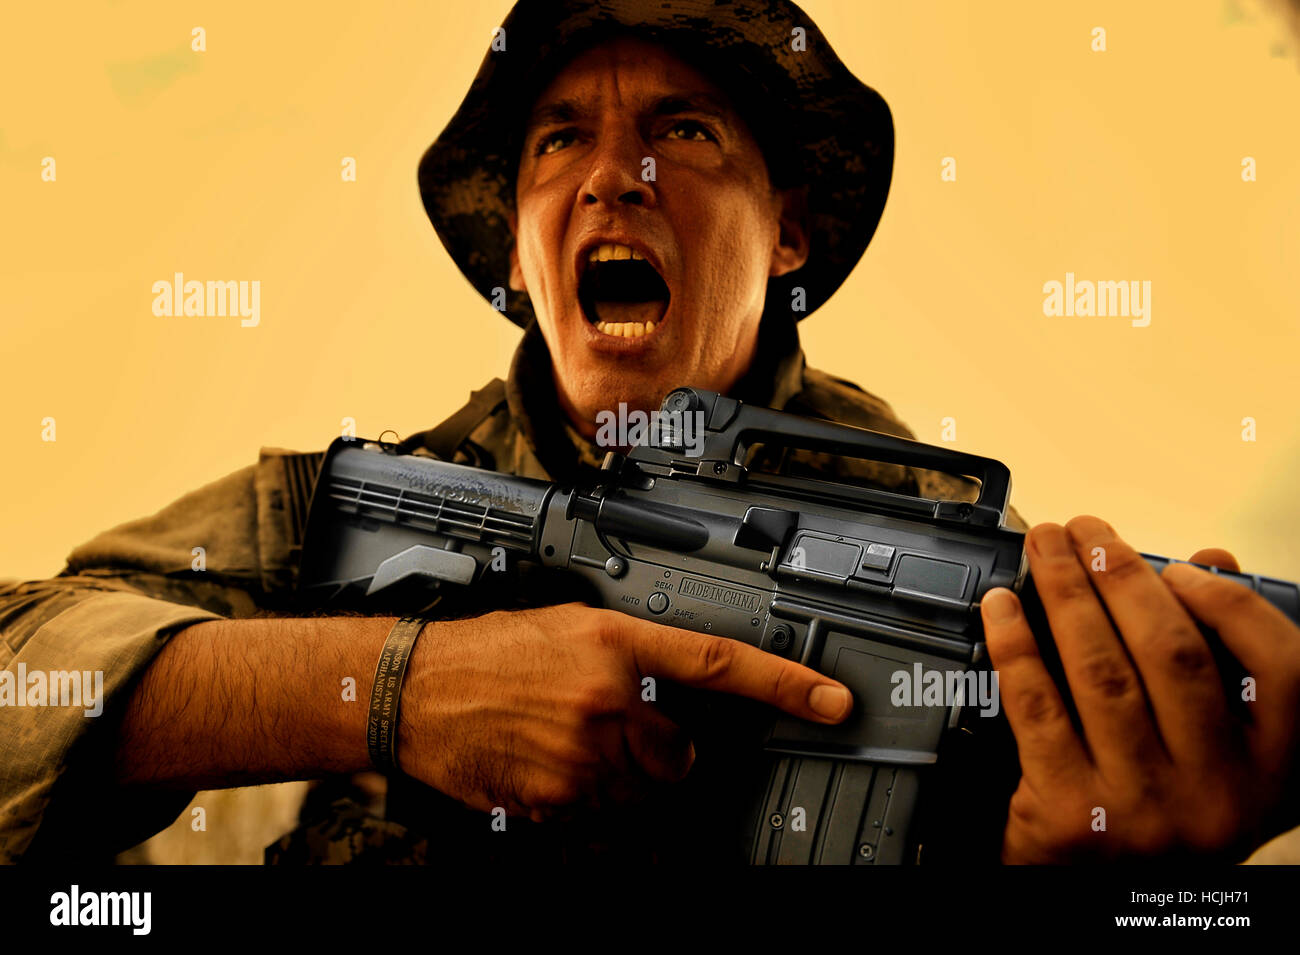 A soldier screams loudly as he demonstrates how to use a machine gun. Wearing a boonie cap and military uniform with the sleeves rolled up, he clutches an automatic rifle. Stock Photo